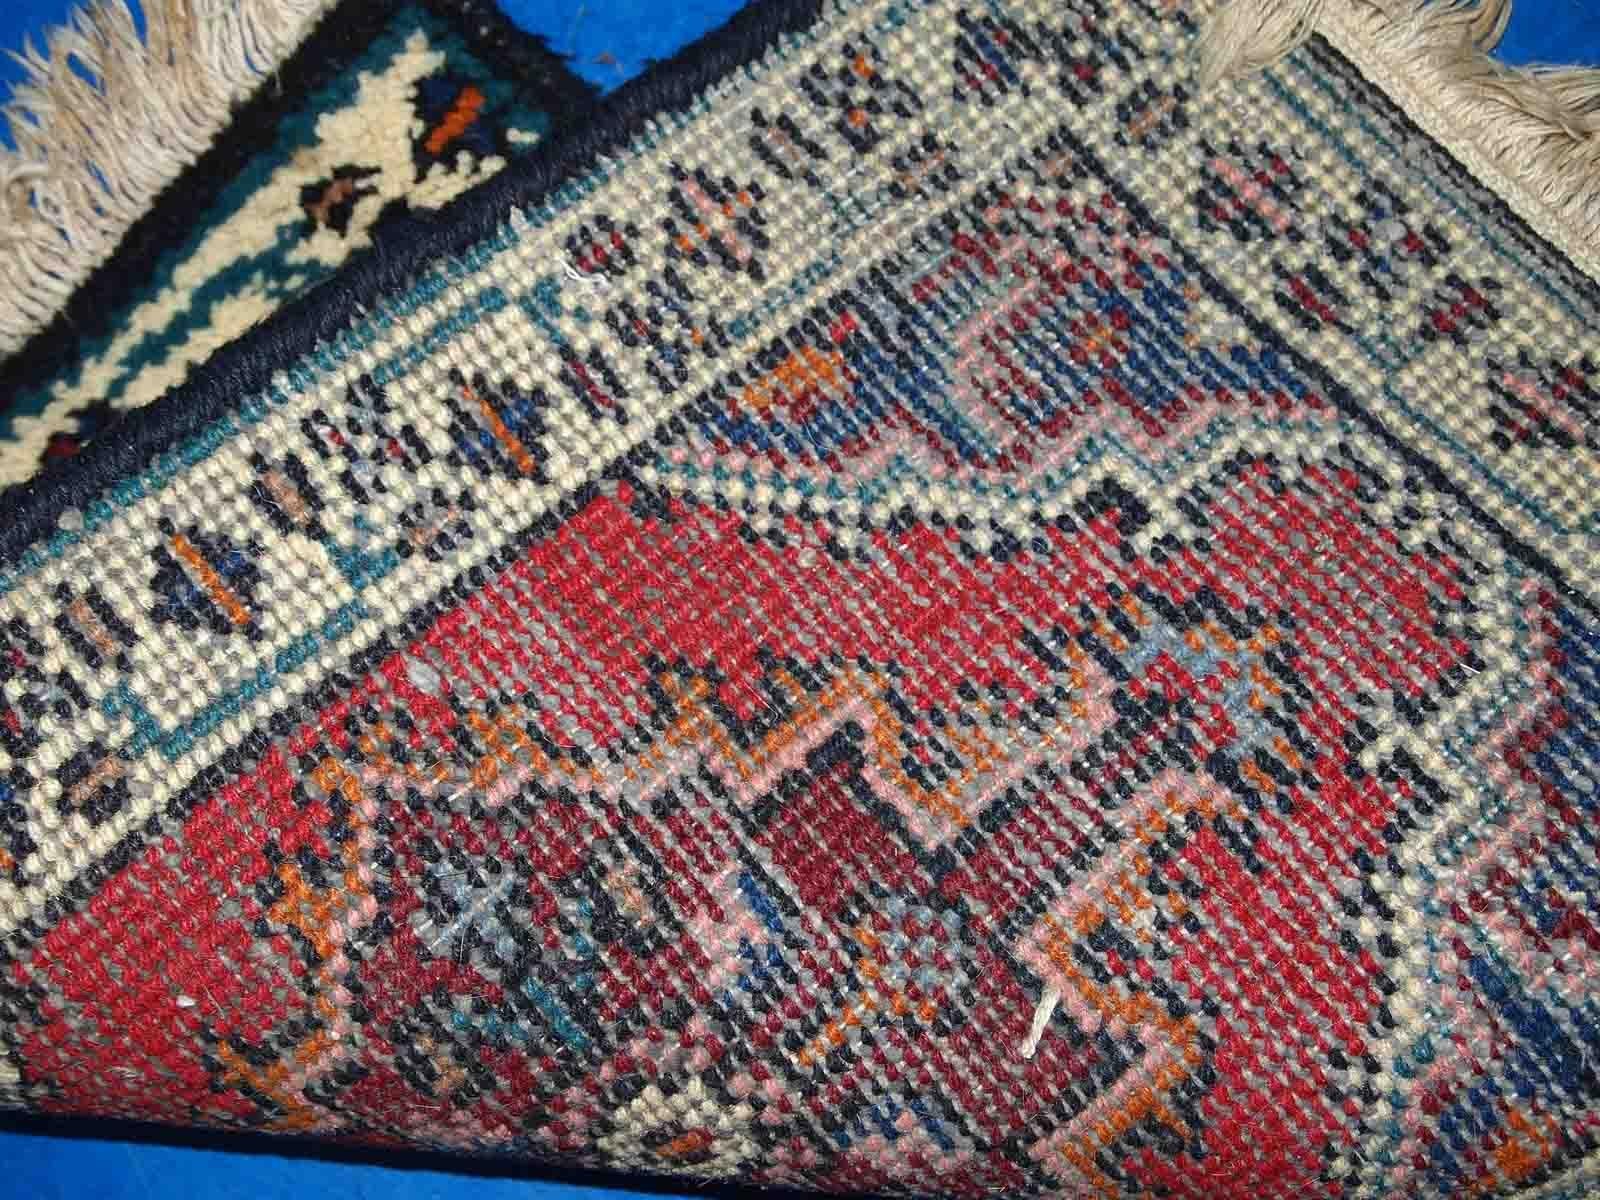 Vintage handmade Middle Eastern mat in original good condition. The rug is from the end of 20th century.

-condition: original good, 

-circa: 1970s,

-size: 1.3' x 1.9' (40cm x 60cm),

-material: wool,

-country of origin: Middle